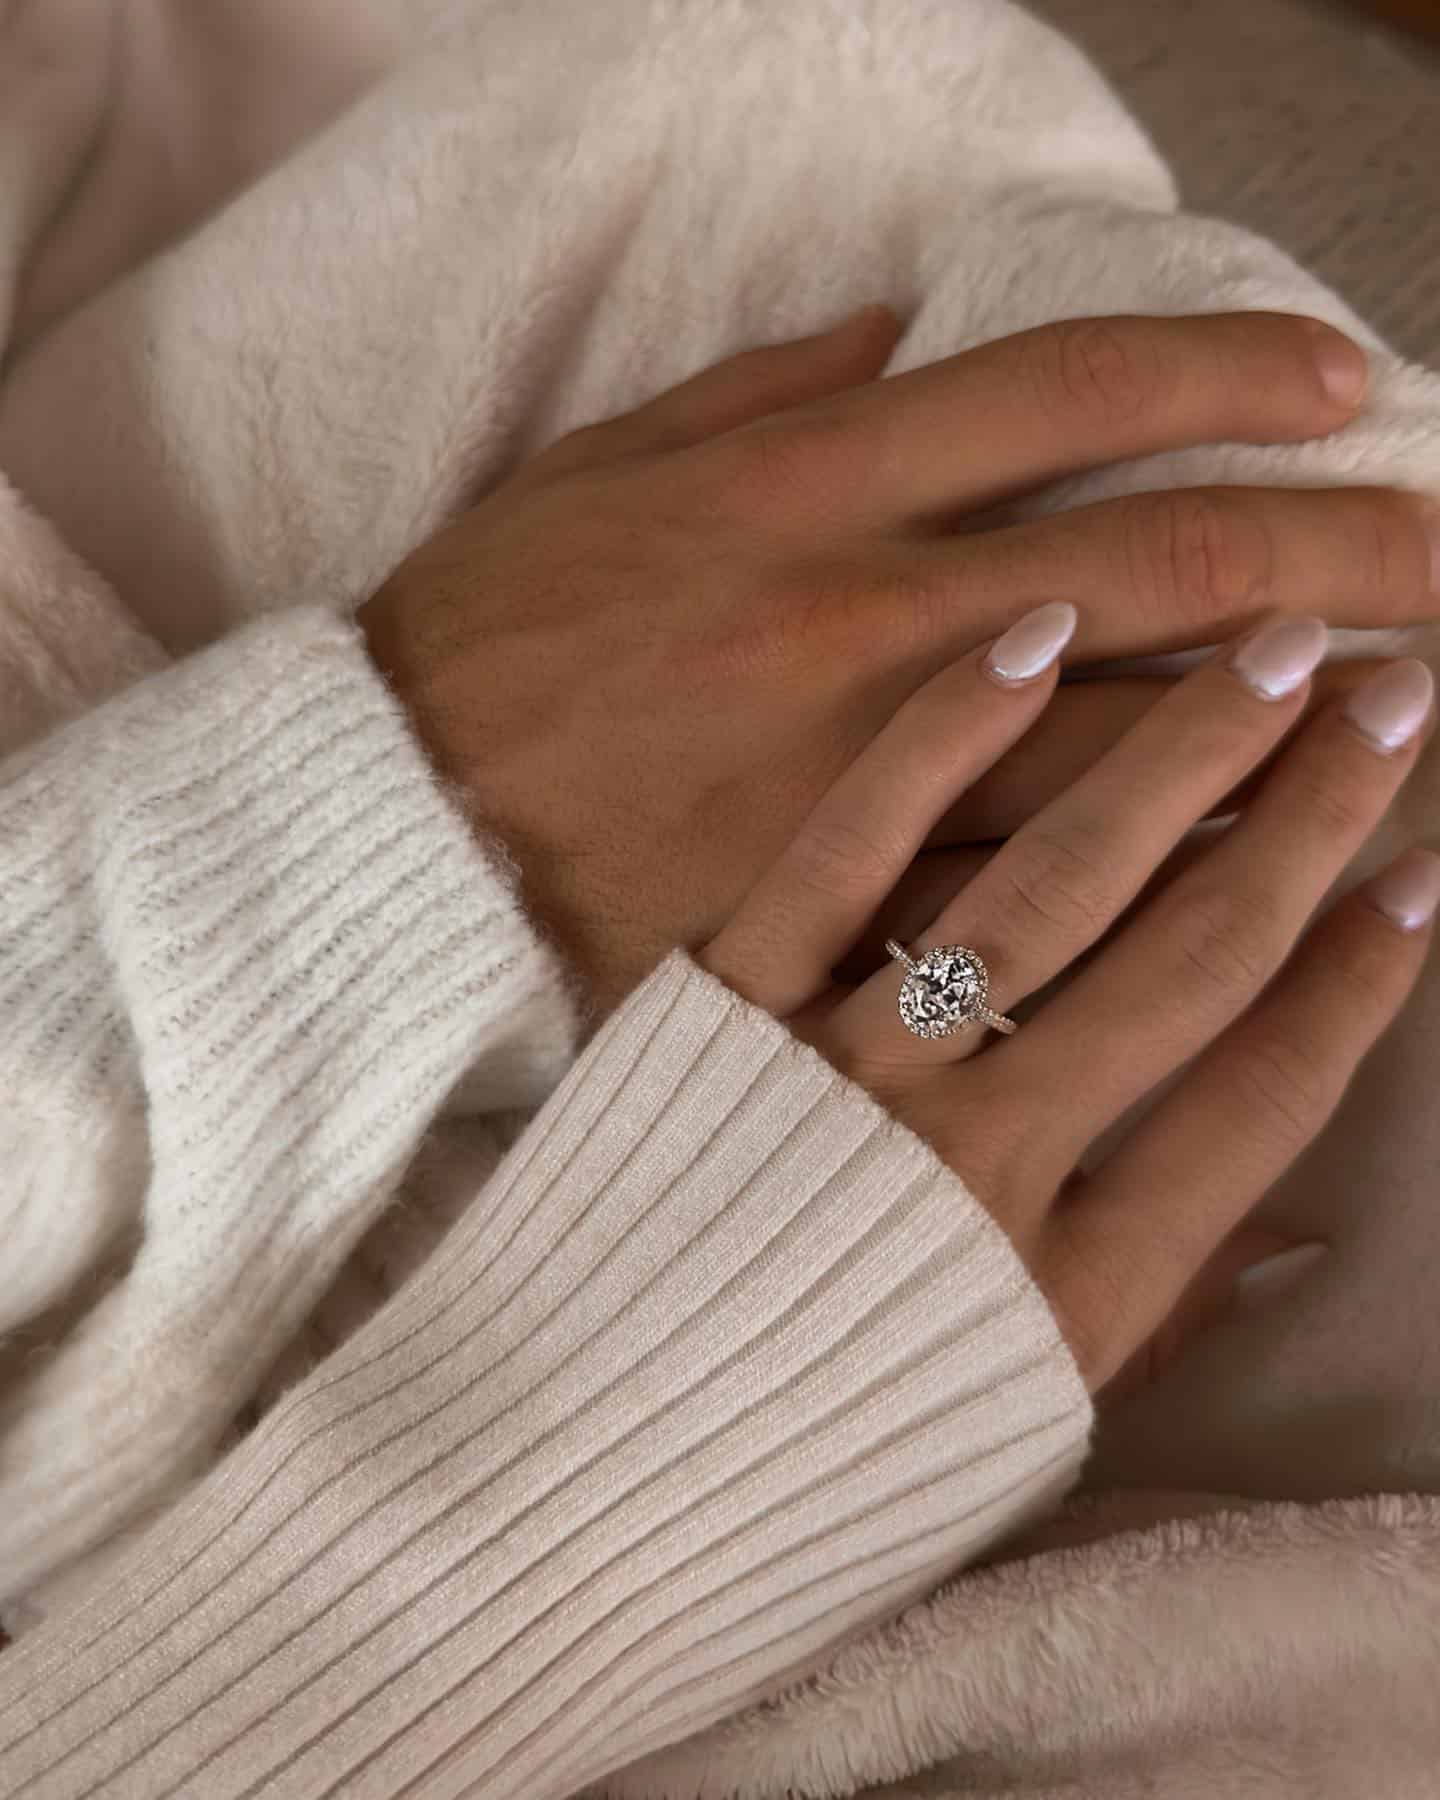 Is it okay to buy a diamond alternative engagement ring